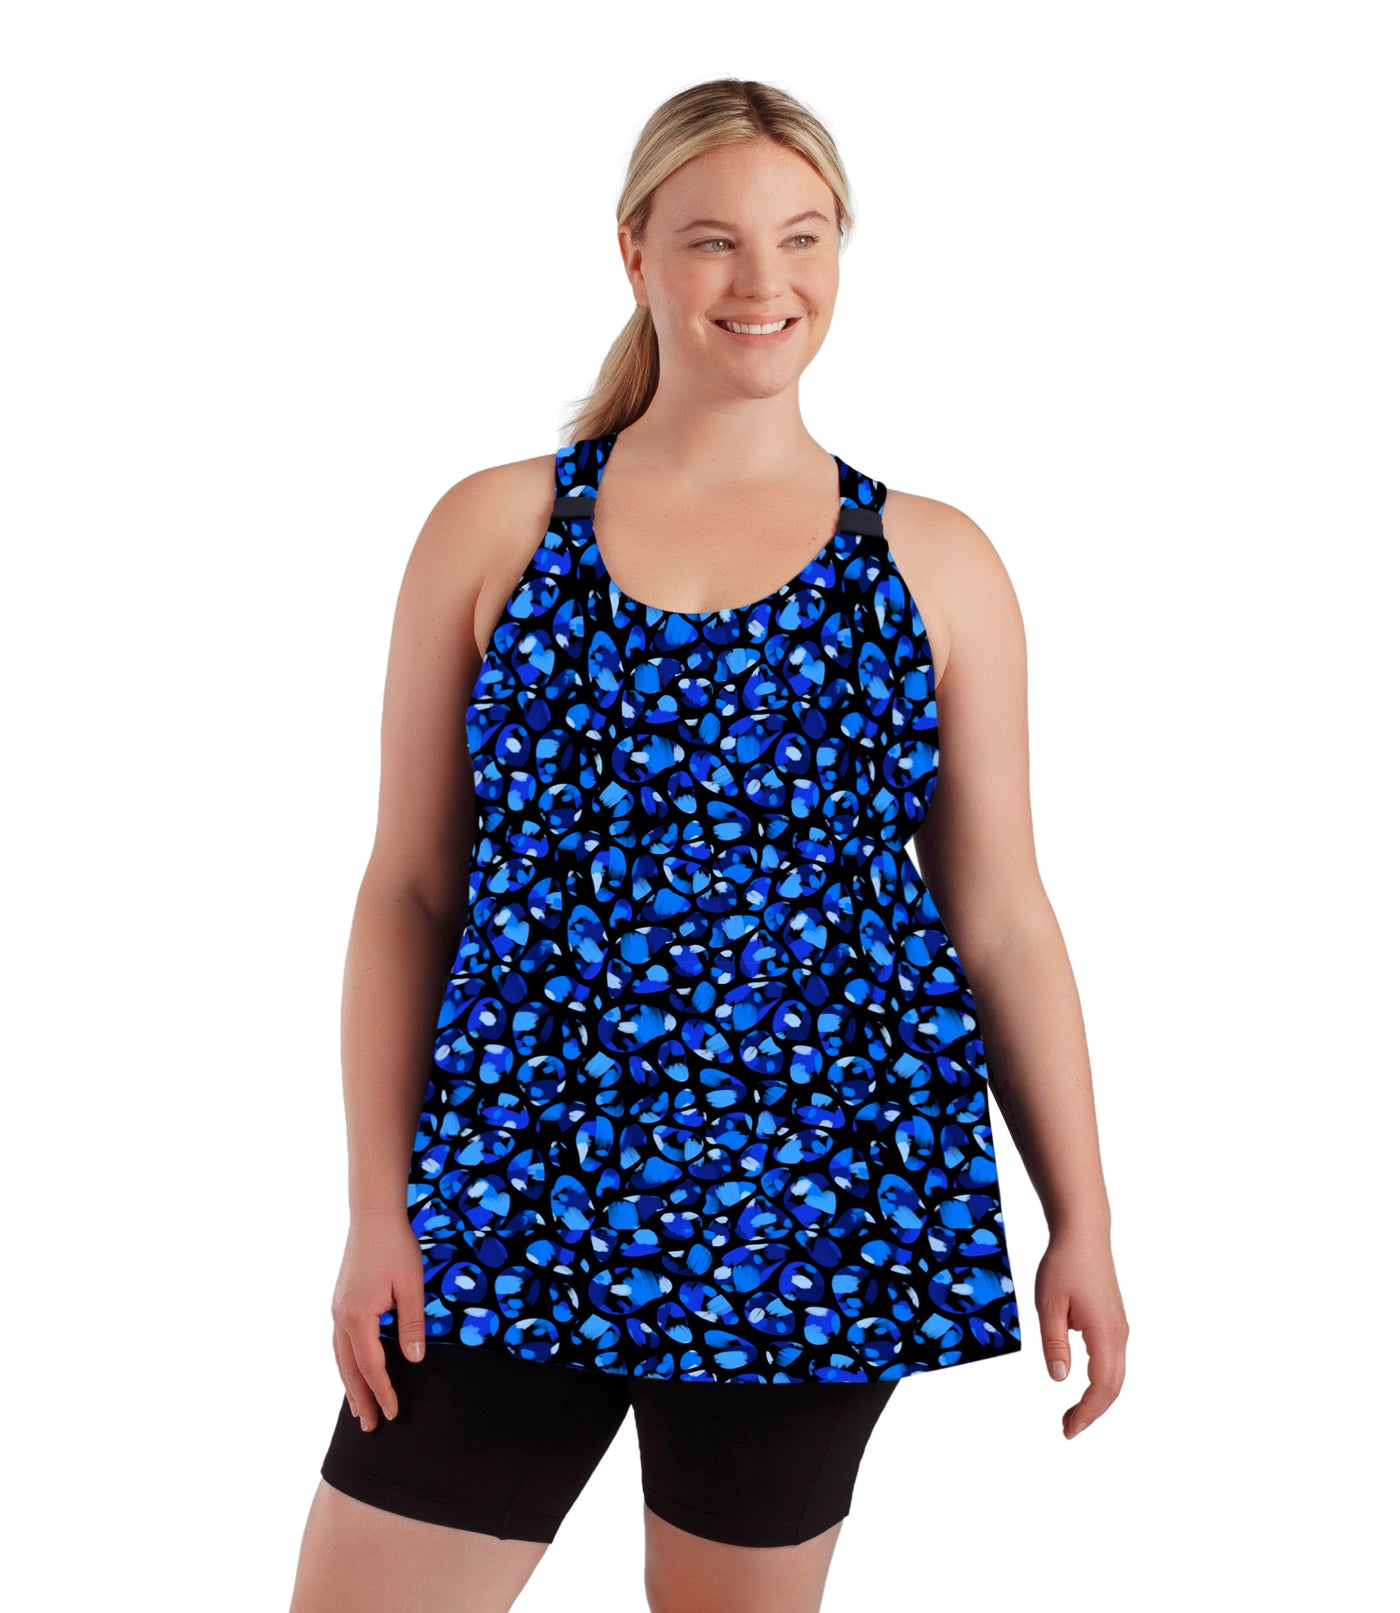 Plus size woman, facing front, wearing JunoActive plus size AquaSport Hanalei Top Ocean Blues Print Black. The tankini has a cinched shoulder detail in front, vents at the side seams, and a blue bubble print. 